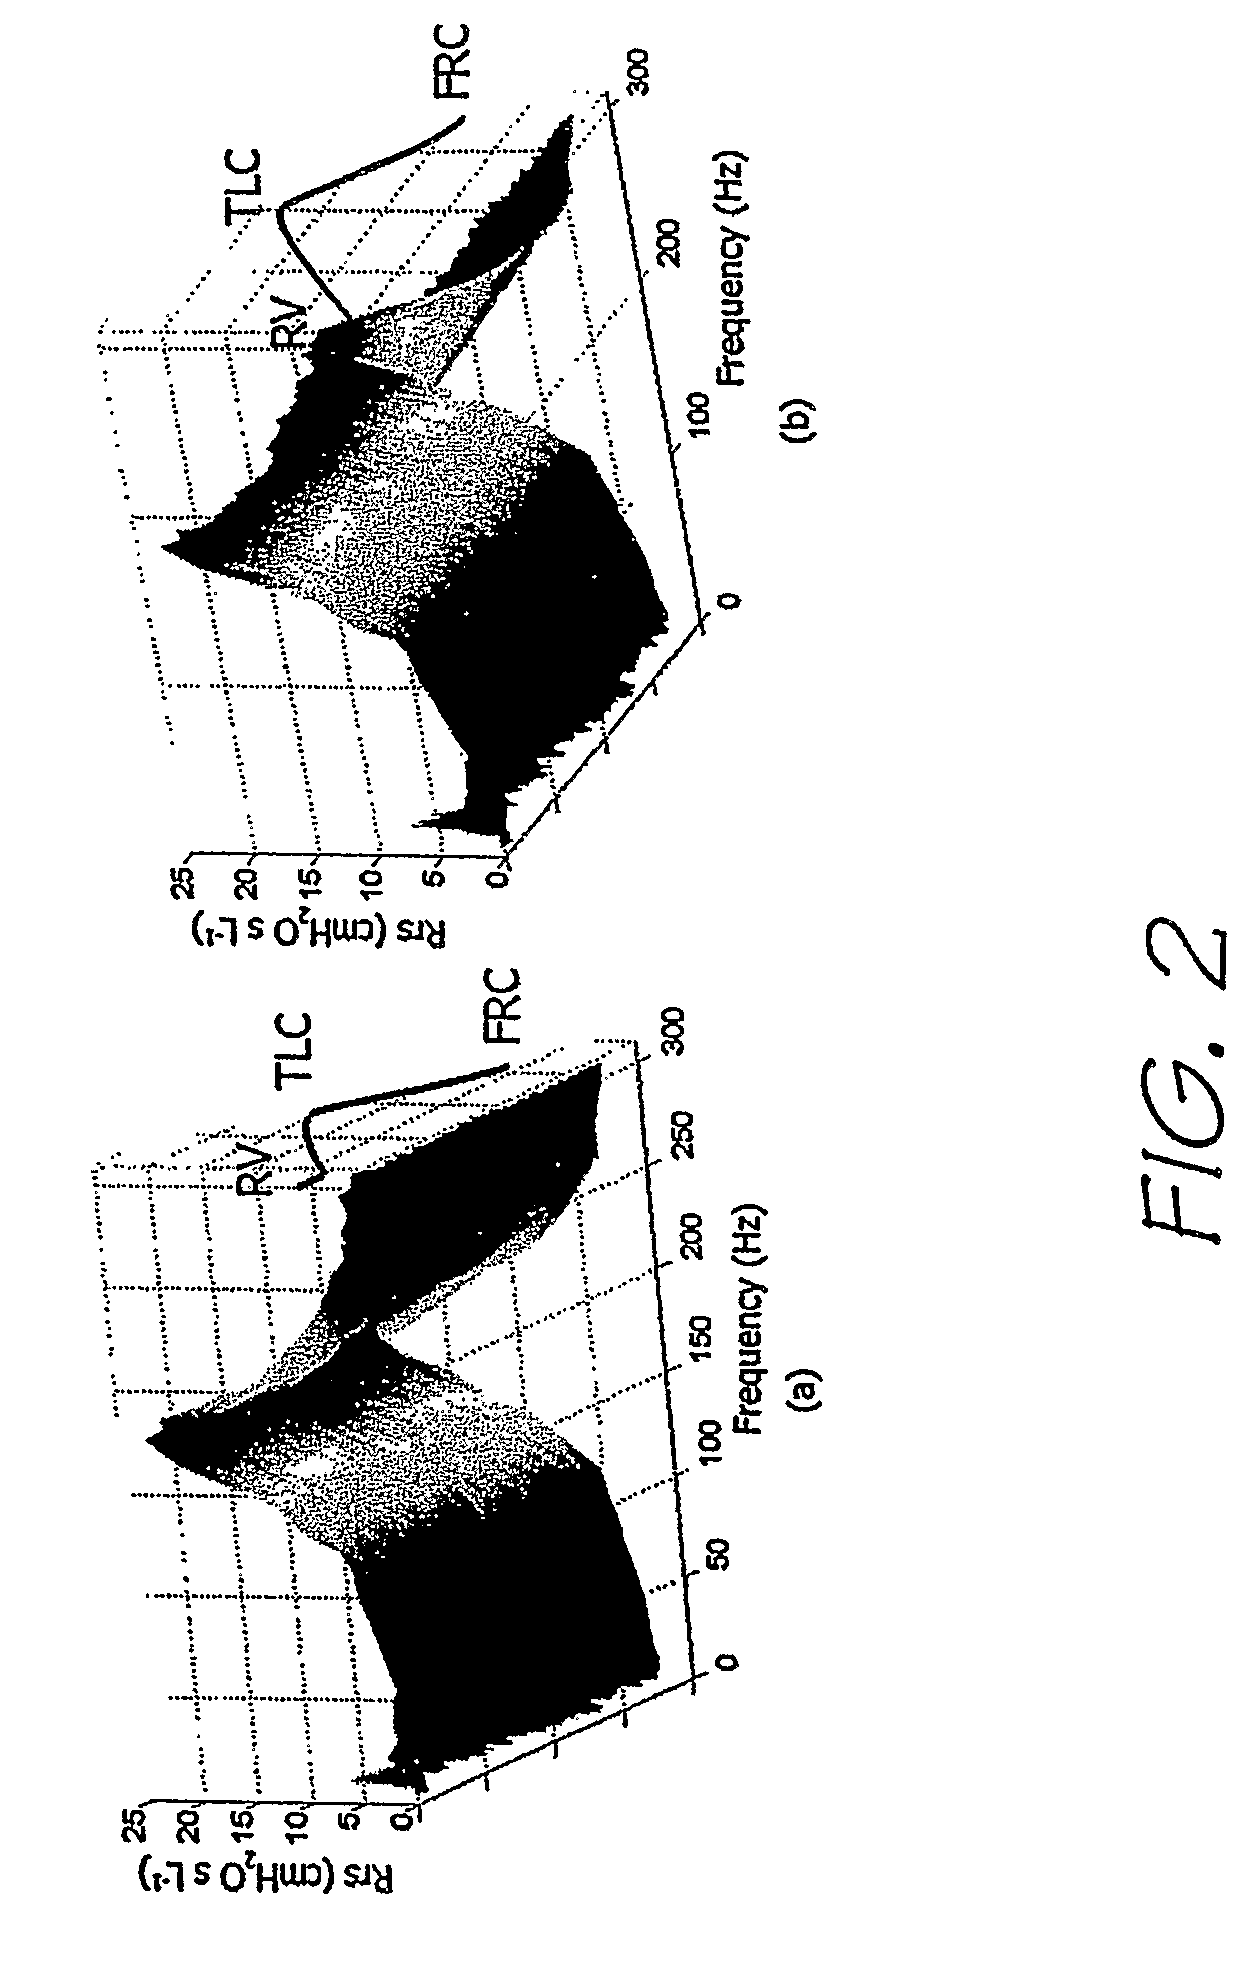 Method of measuring an acoustic impedance of a respiratory system and diagnosing a respiratory disease or disorder or monitoring treatment of same